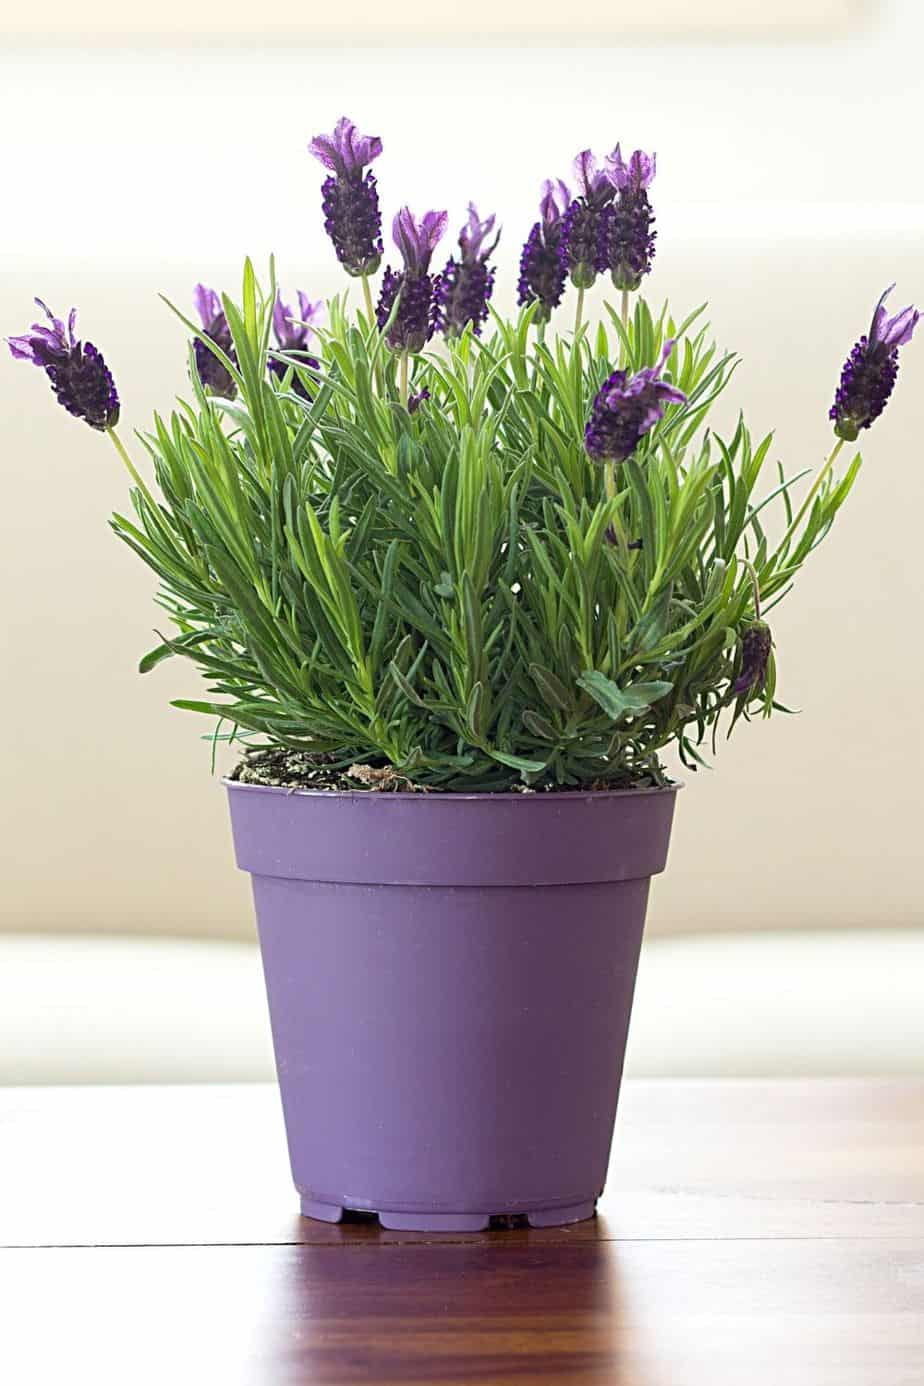 Lavender is a fragrant plant you can grow in a pot on a west-facing balcony